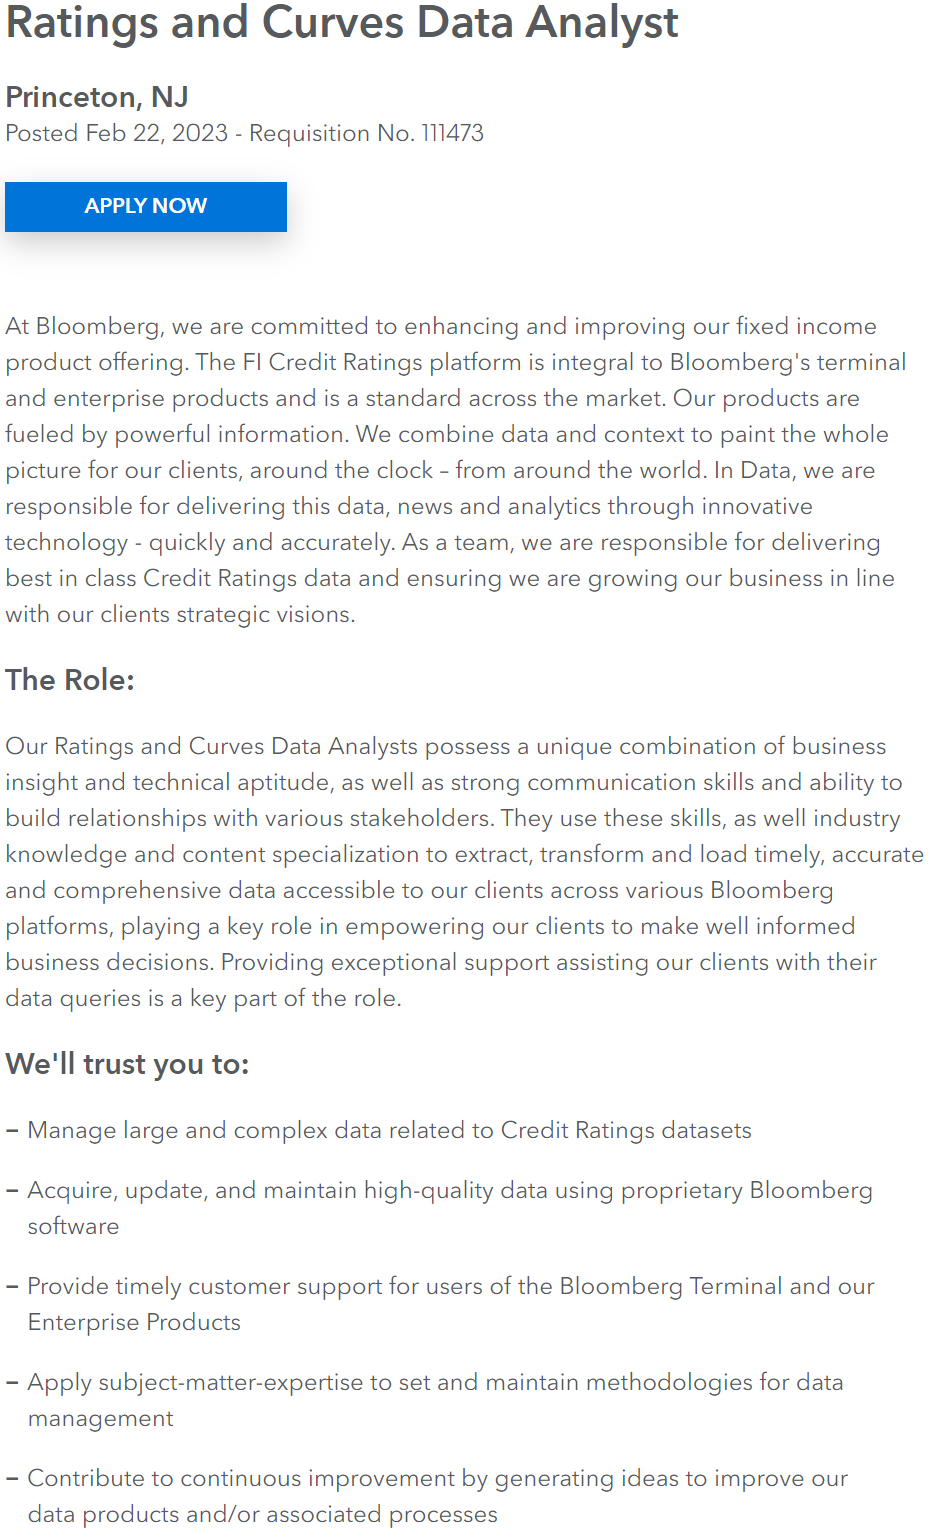 Remote Data Analysts Jobs at Bloomberg